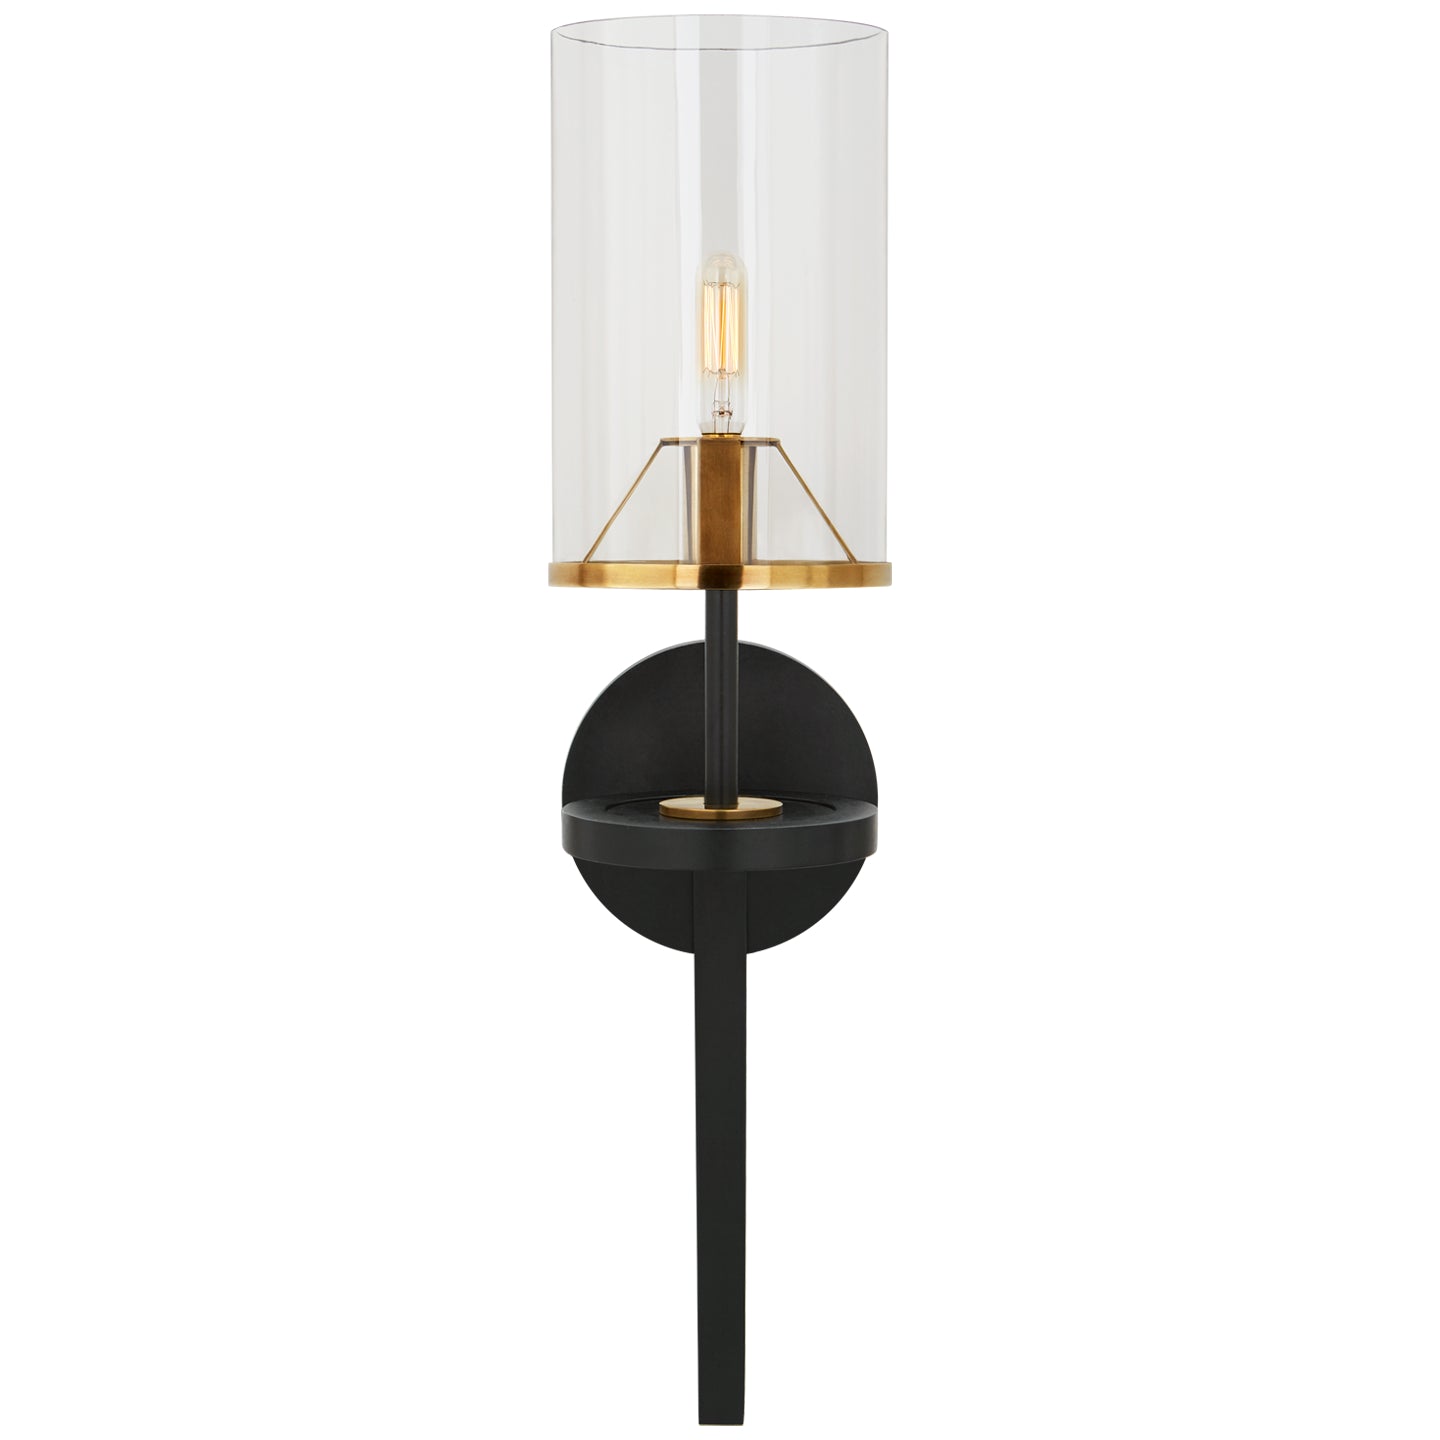 Visual Comfort Signature - TOB 2502BK/HAB-CG2 - One Light Wall Sconce - Vivier - Blackened Iron and Hand-Rubbed Antique Brass